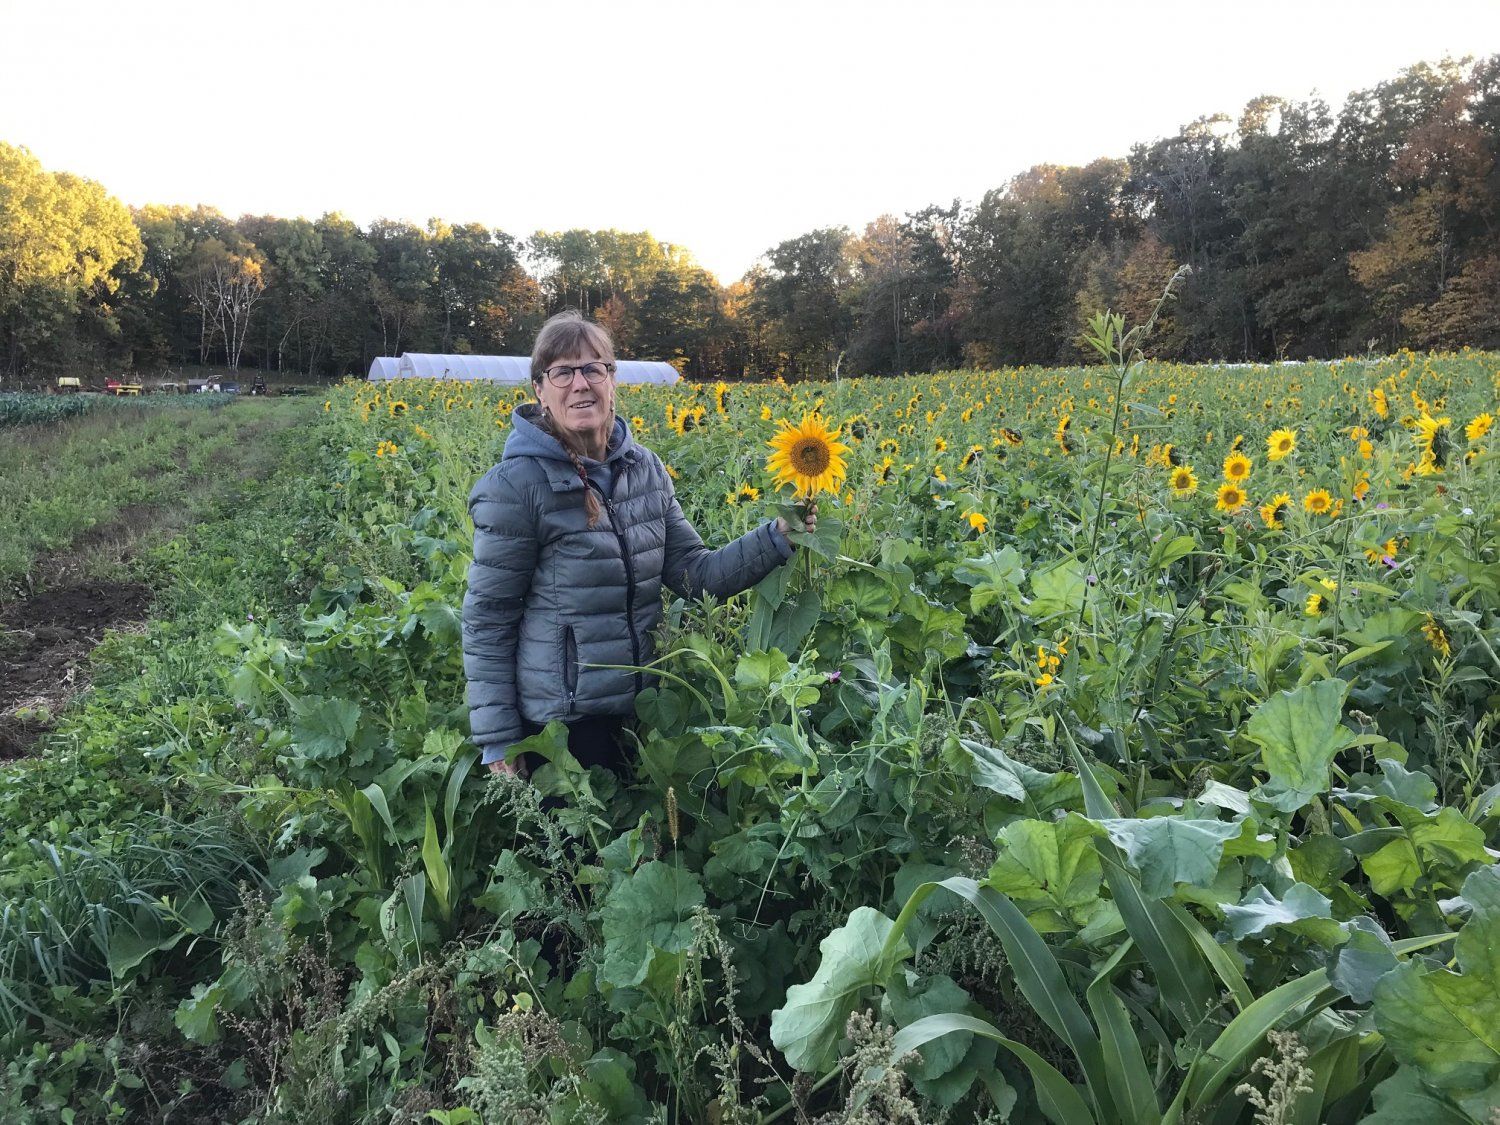 Previous Happening: Farm Happenings for October 20, 2021